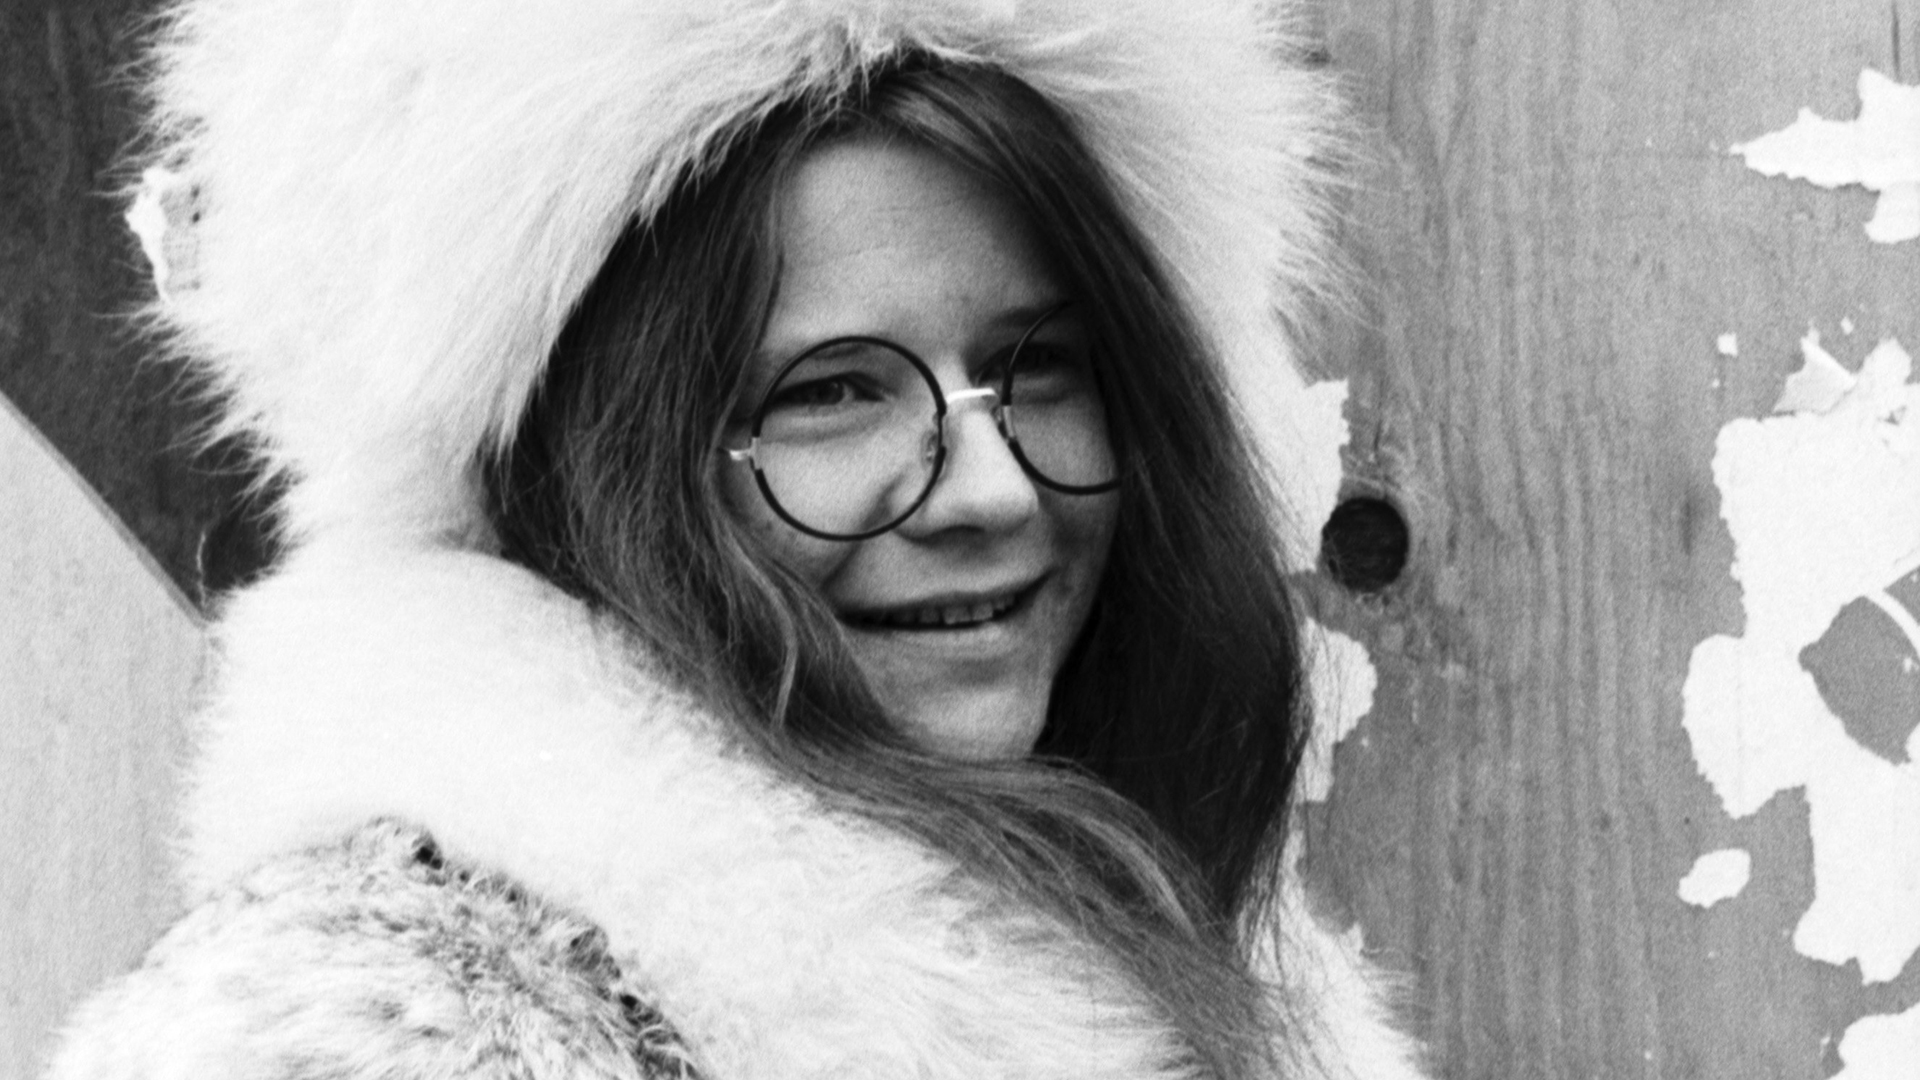 January 19, 1943: Janis Joplin Was Born and Became One of the Biggest Female Rock Stars of Her Generation